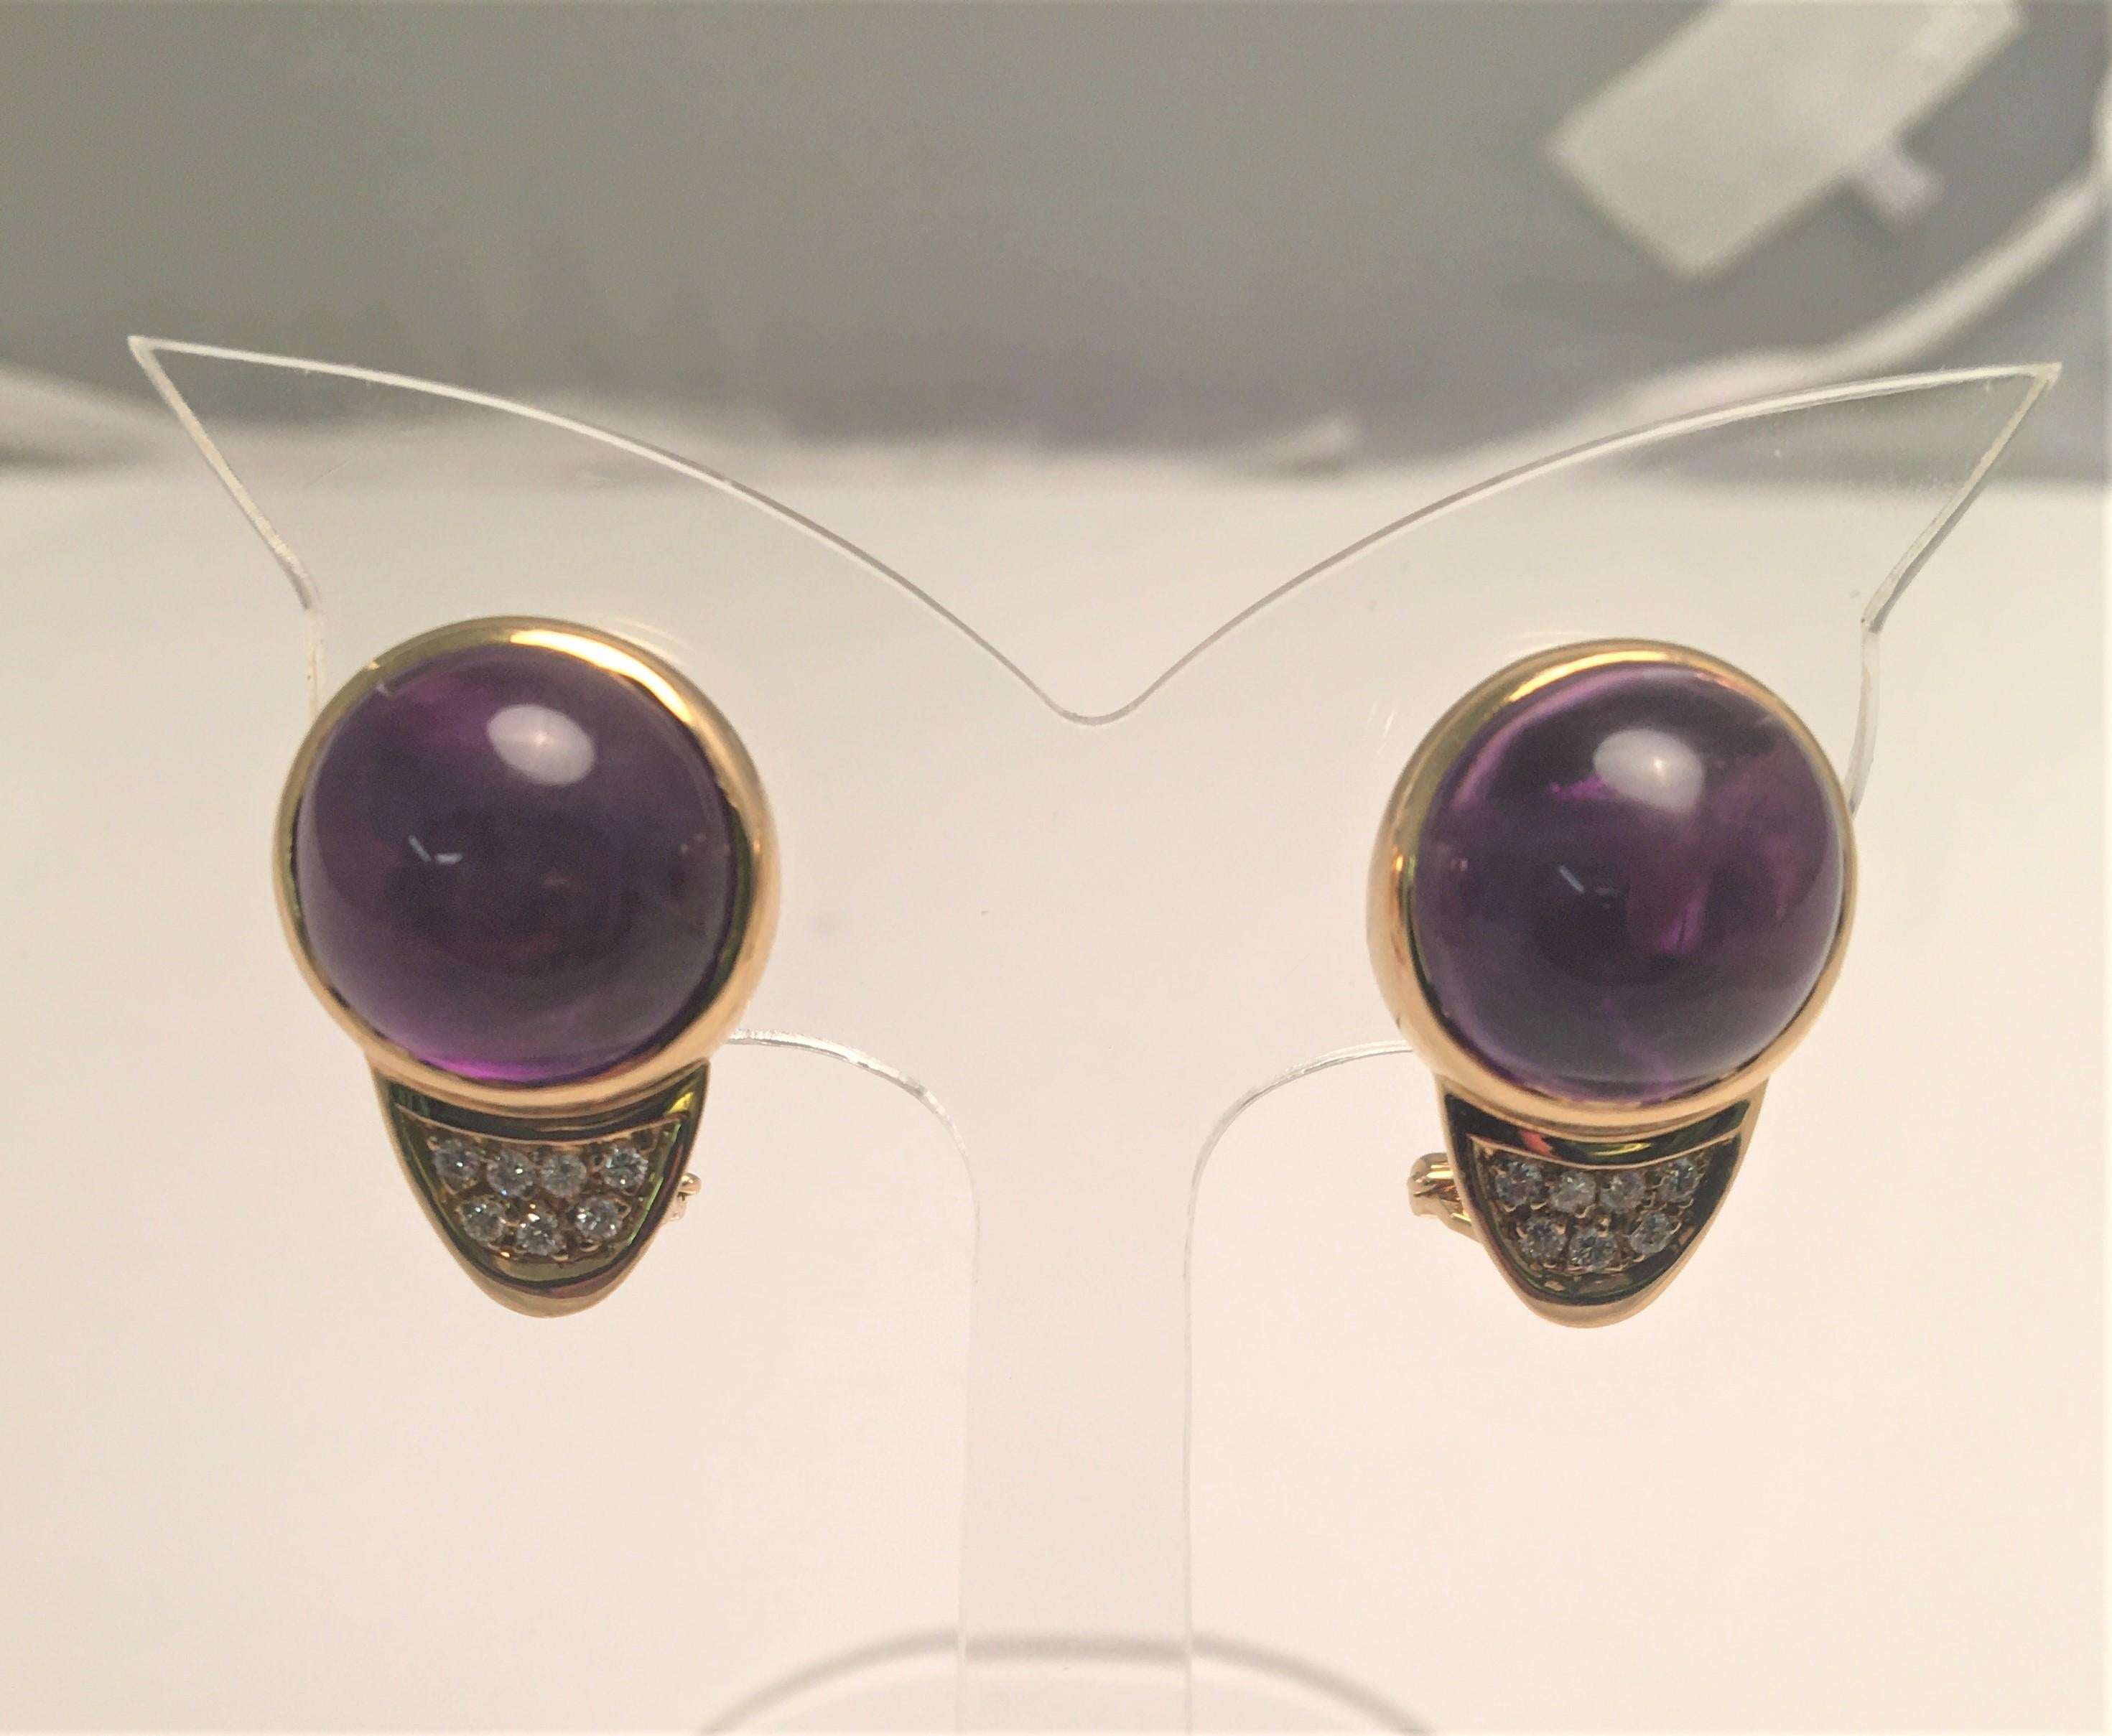 By designer G. Petochi
2 cabochon amethyst stones approximately 13mm round
14 round brilliant cut diamonds (7 per earring), bead set
Diamonds are approximately .14 total weight, F-G color, and VS2-SI1 clarity
Omega closure with collapsible post 
18K